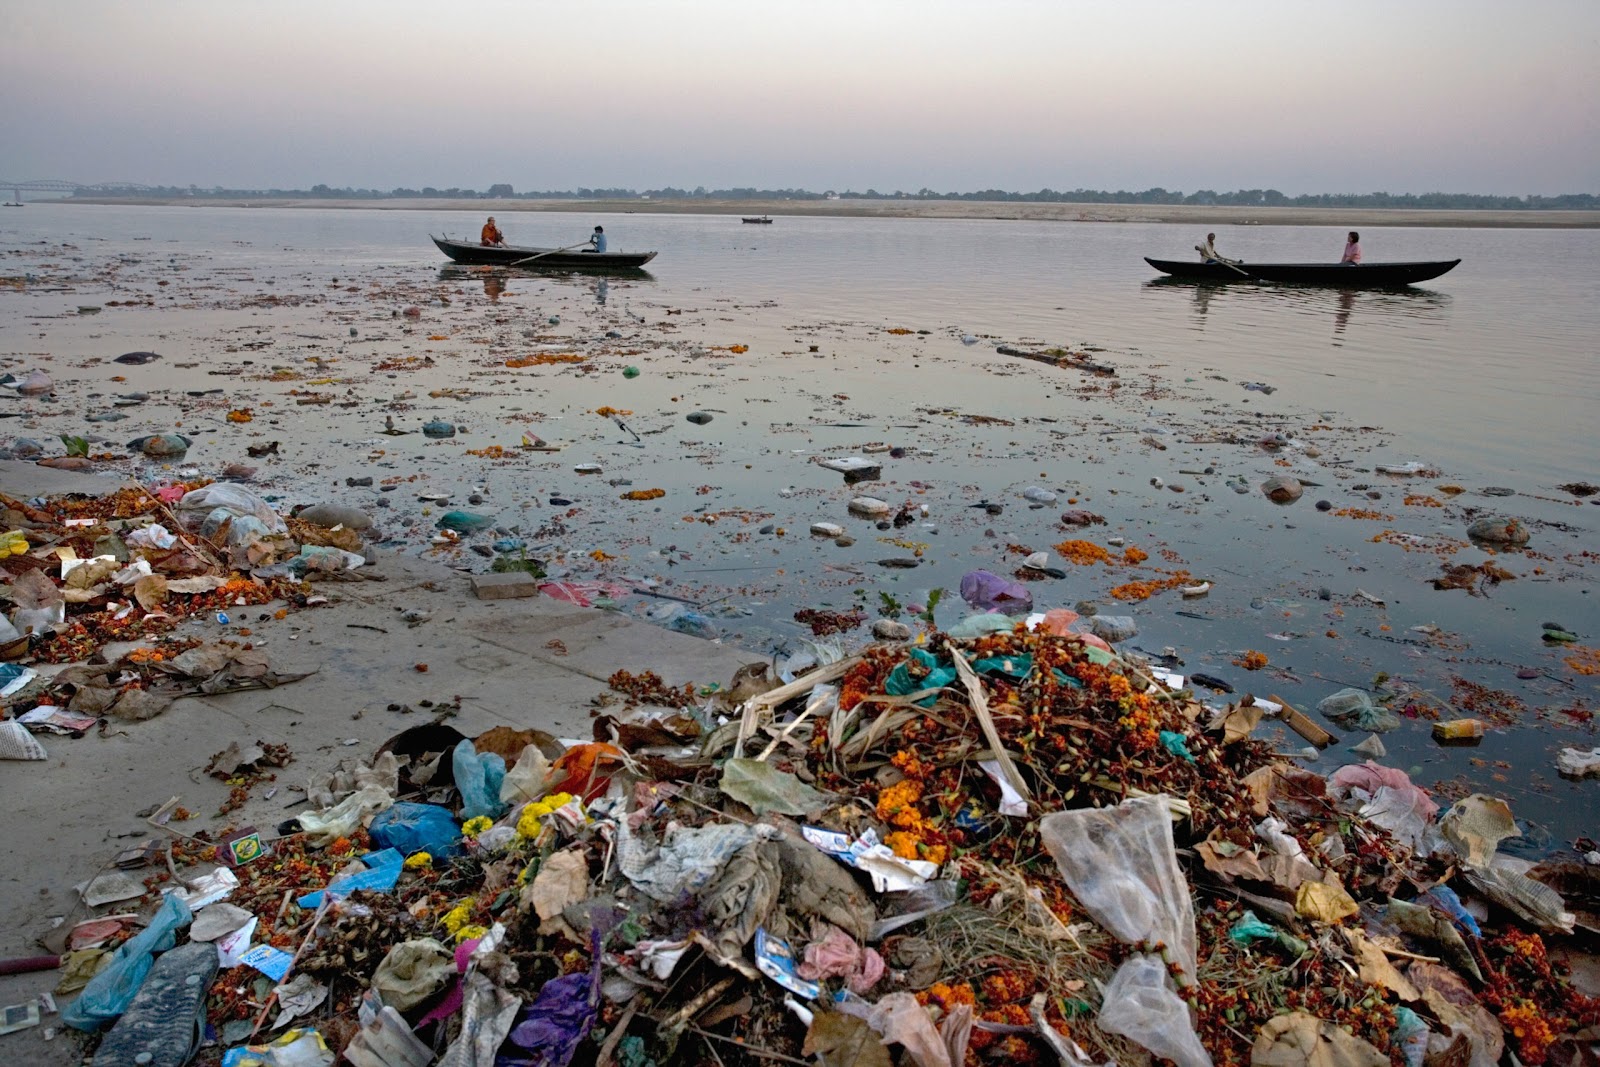 Ganga more polluted than ever, despite Indian government's action plans  |The Third Pole